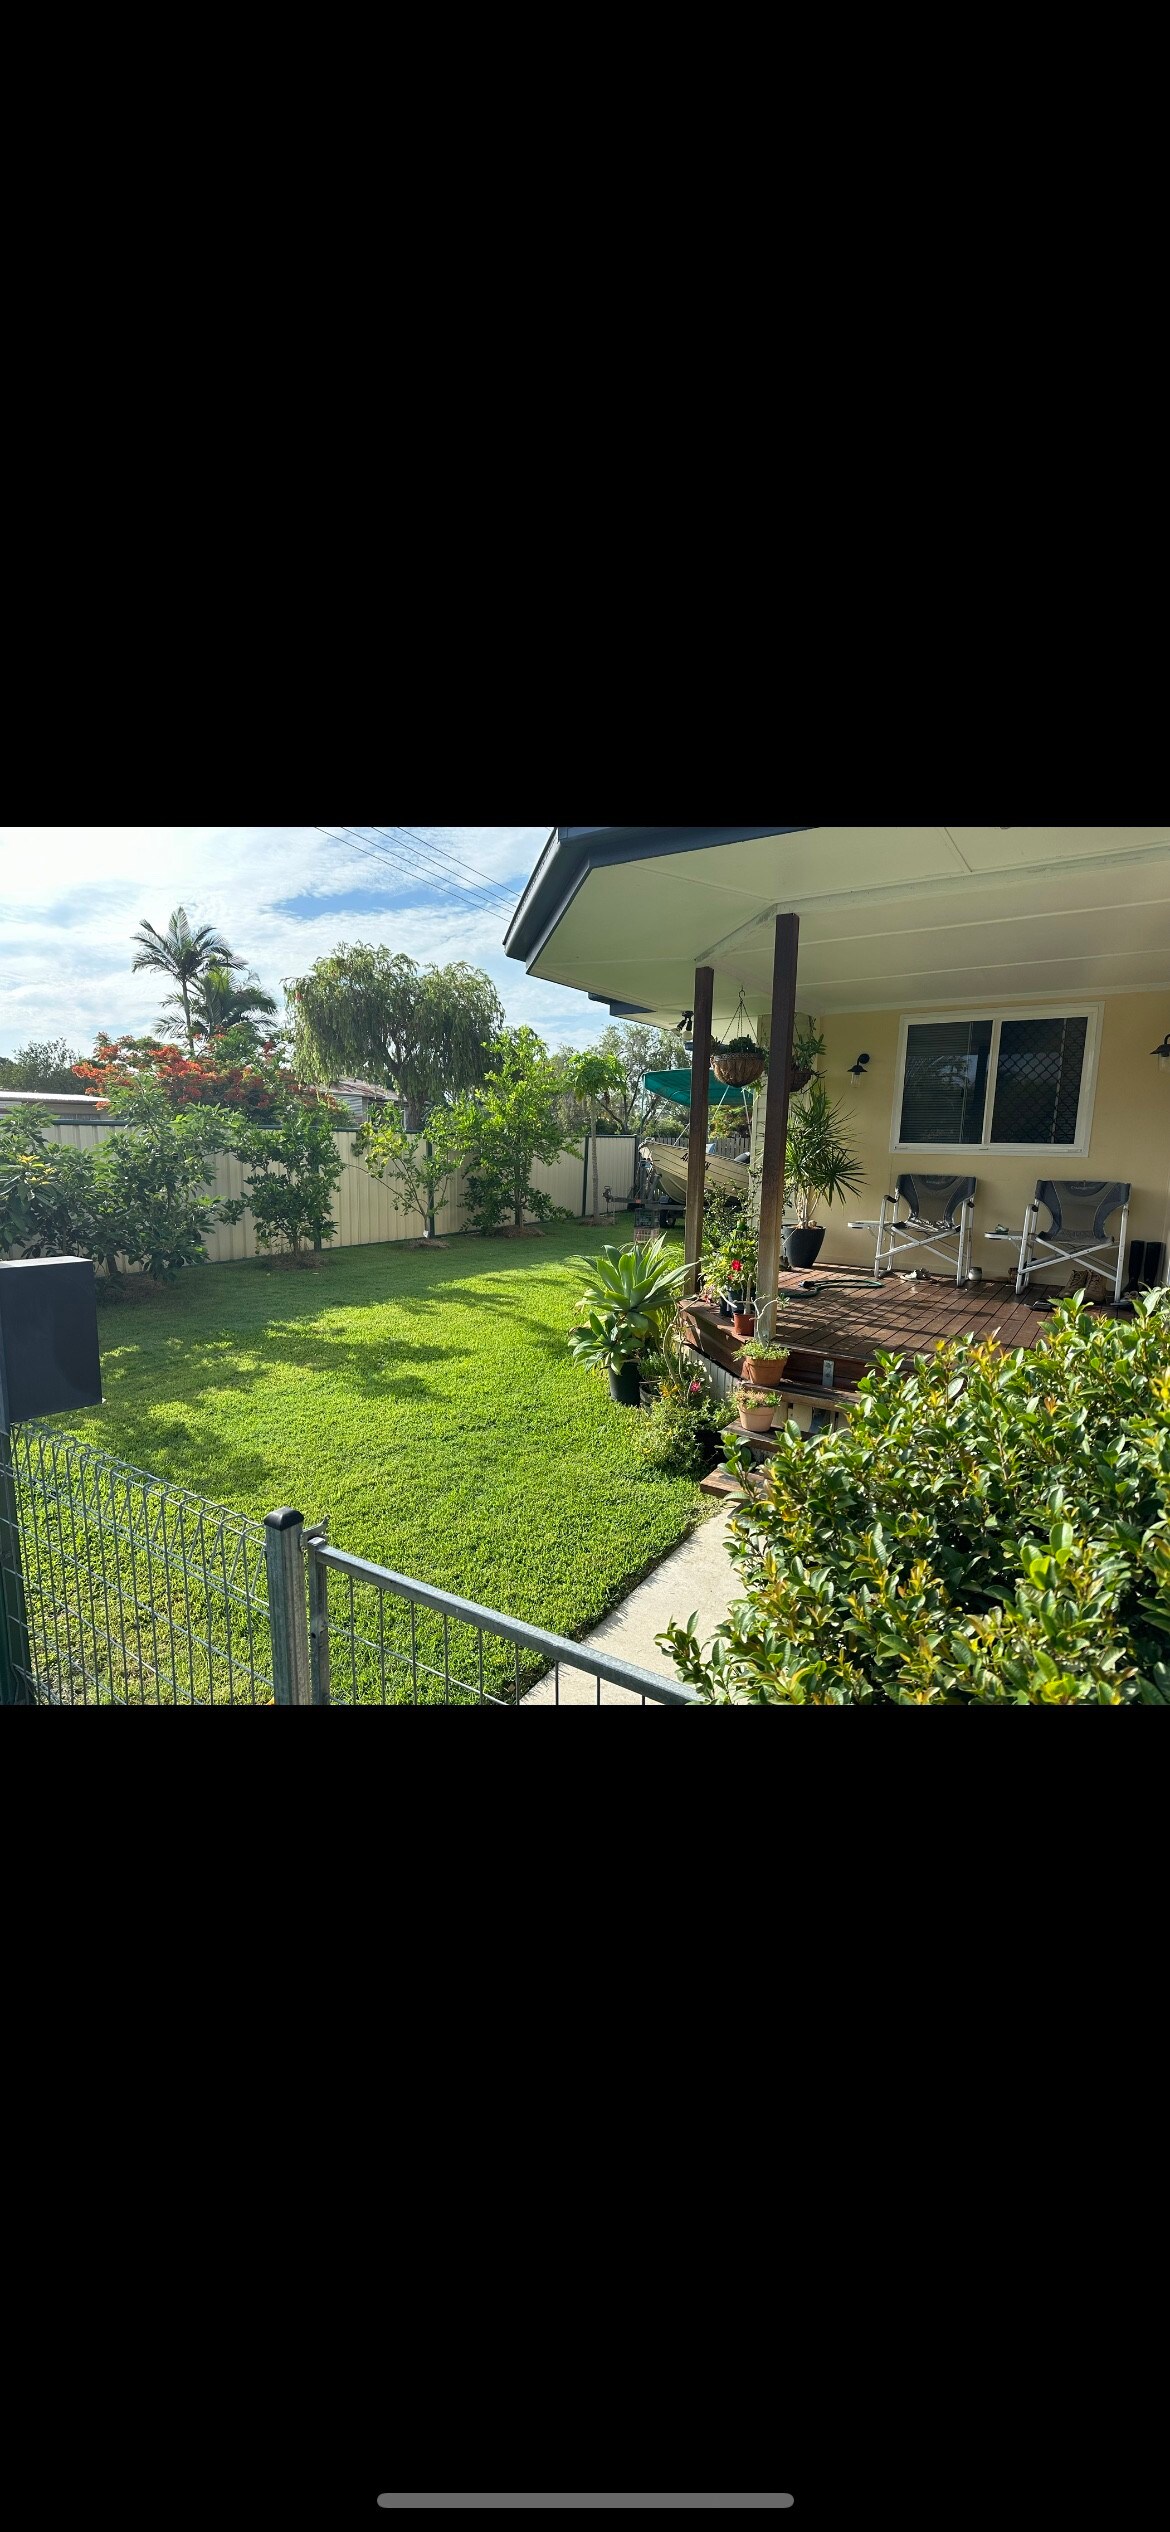 3 Bedroom House - 5 min from Beef Week ShowGrounds